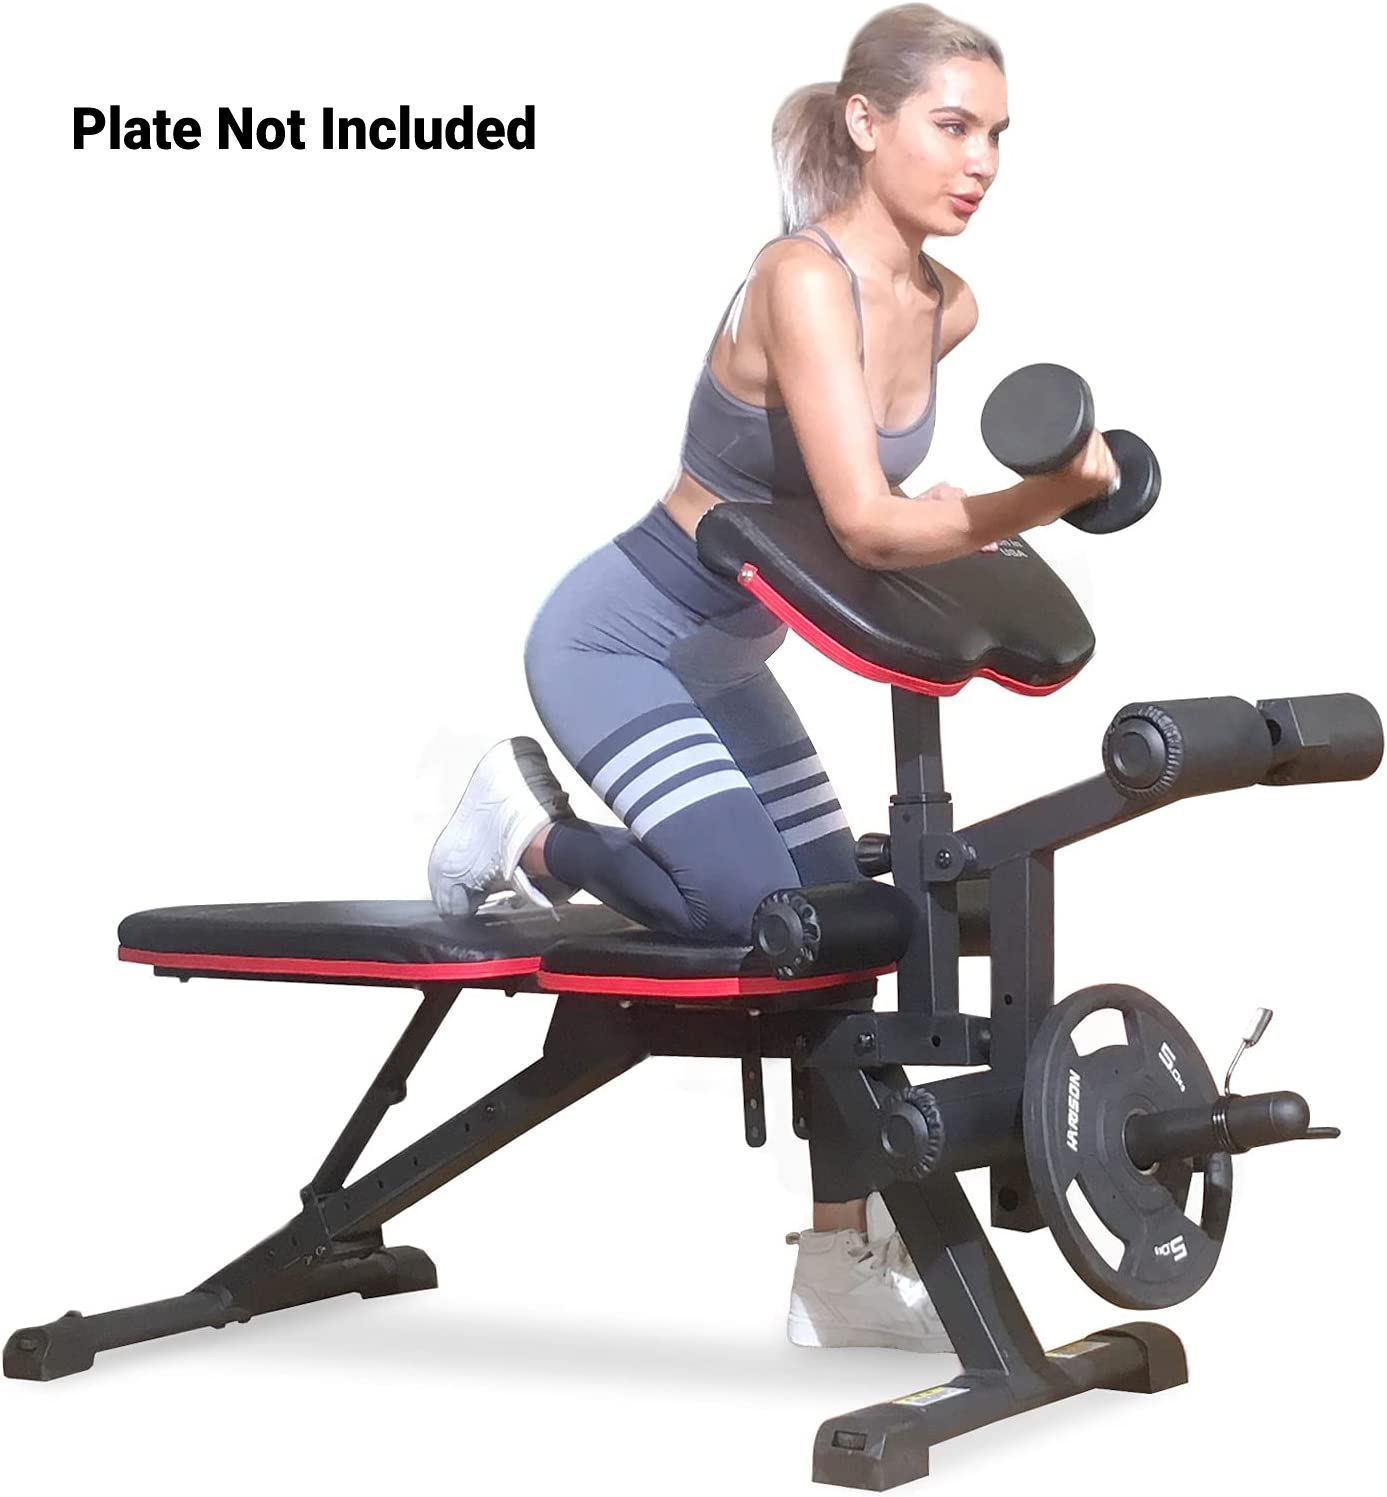 Weight Bench with Leg Extension and Preacher Curl, Incline Decline Heavy Duty Workout Bench for Home Use, HR609 (Plate NOT included)-Trainnox